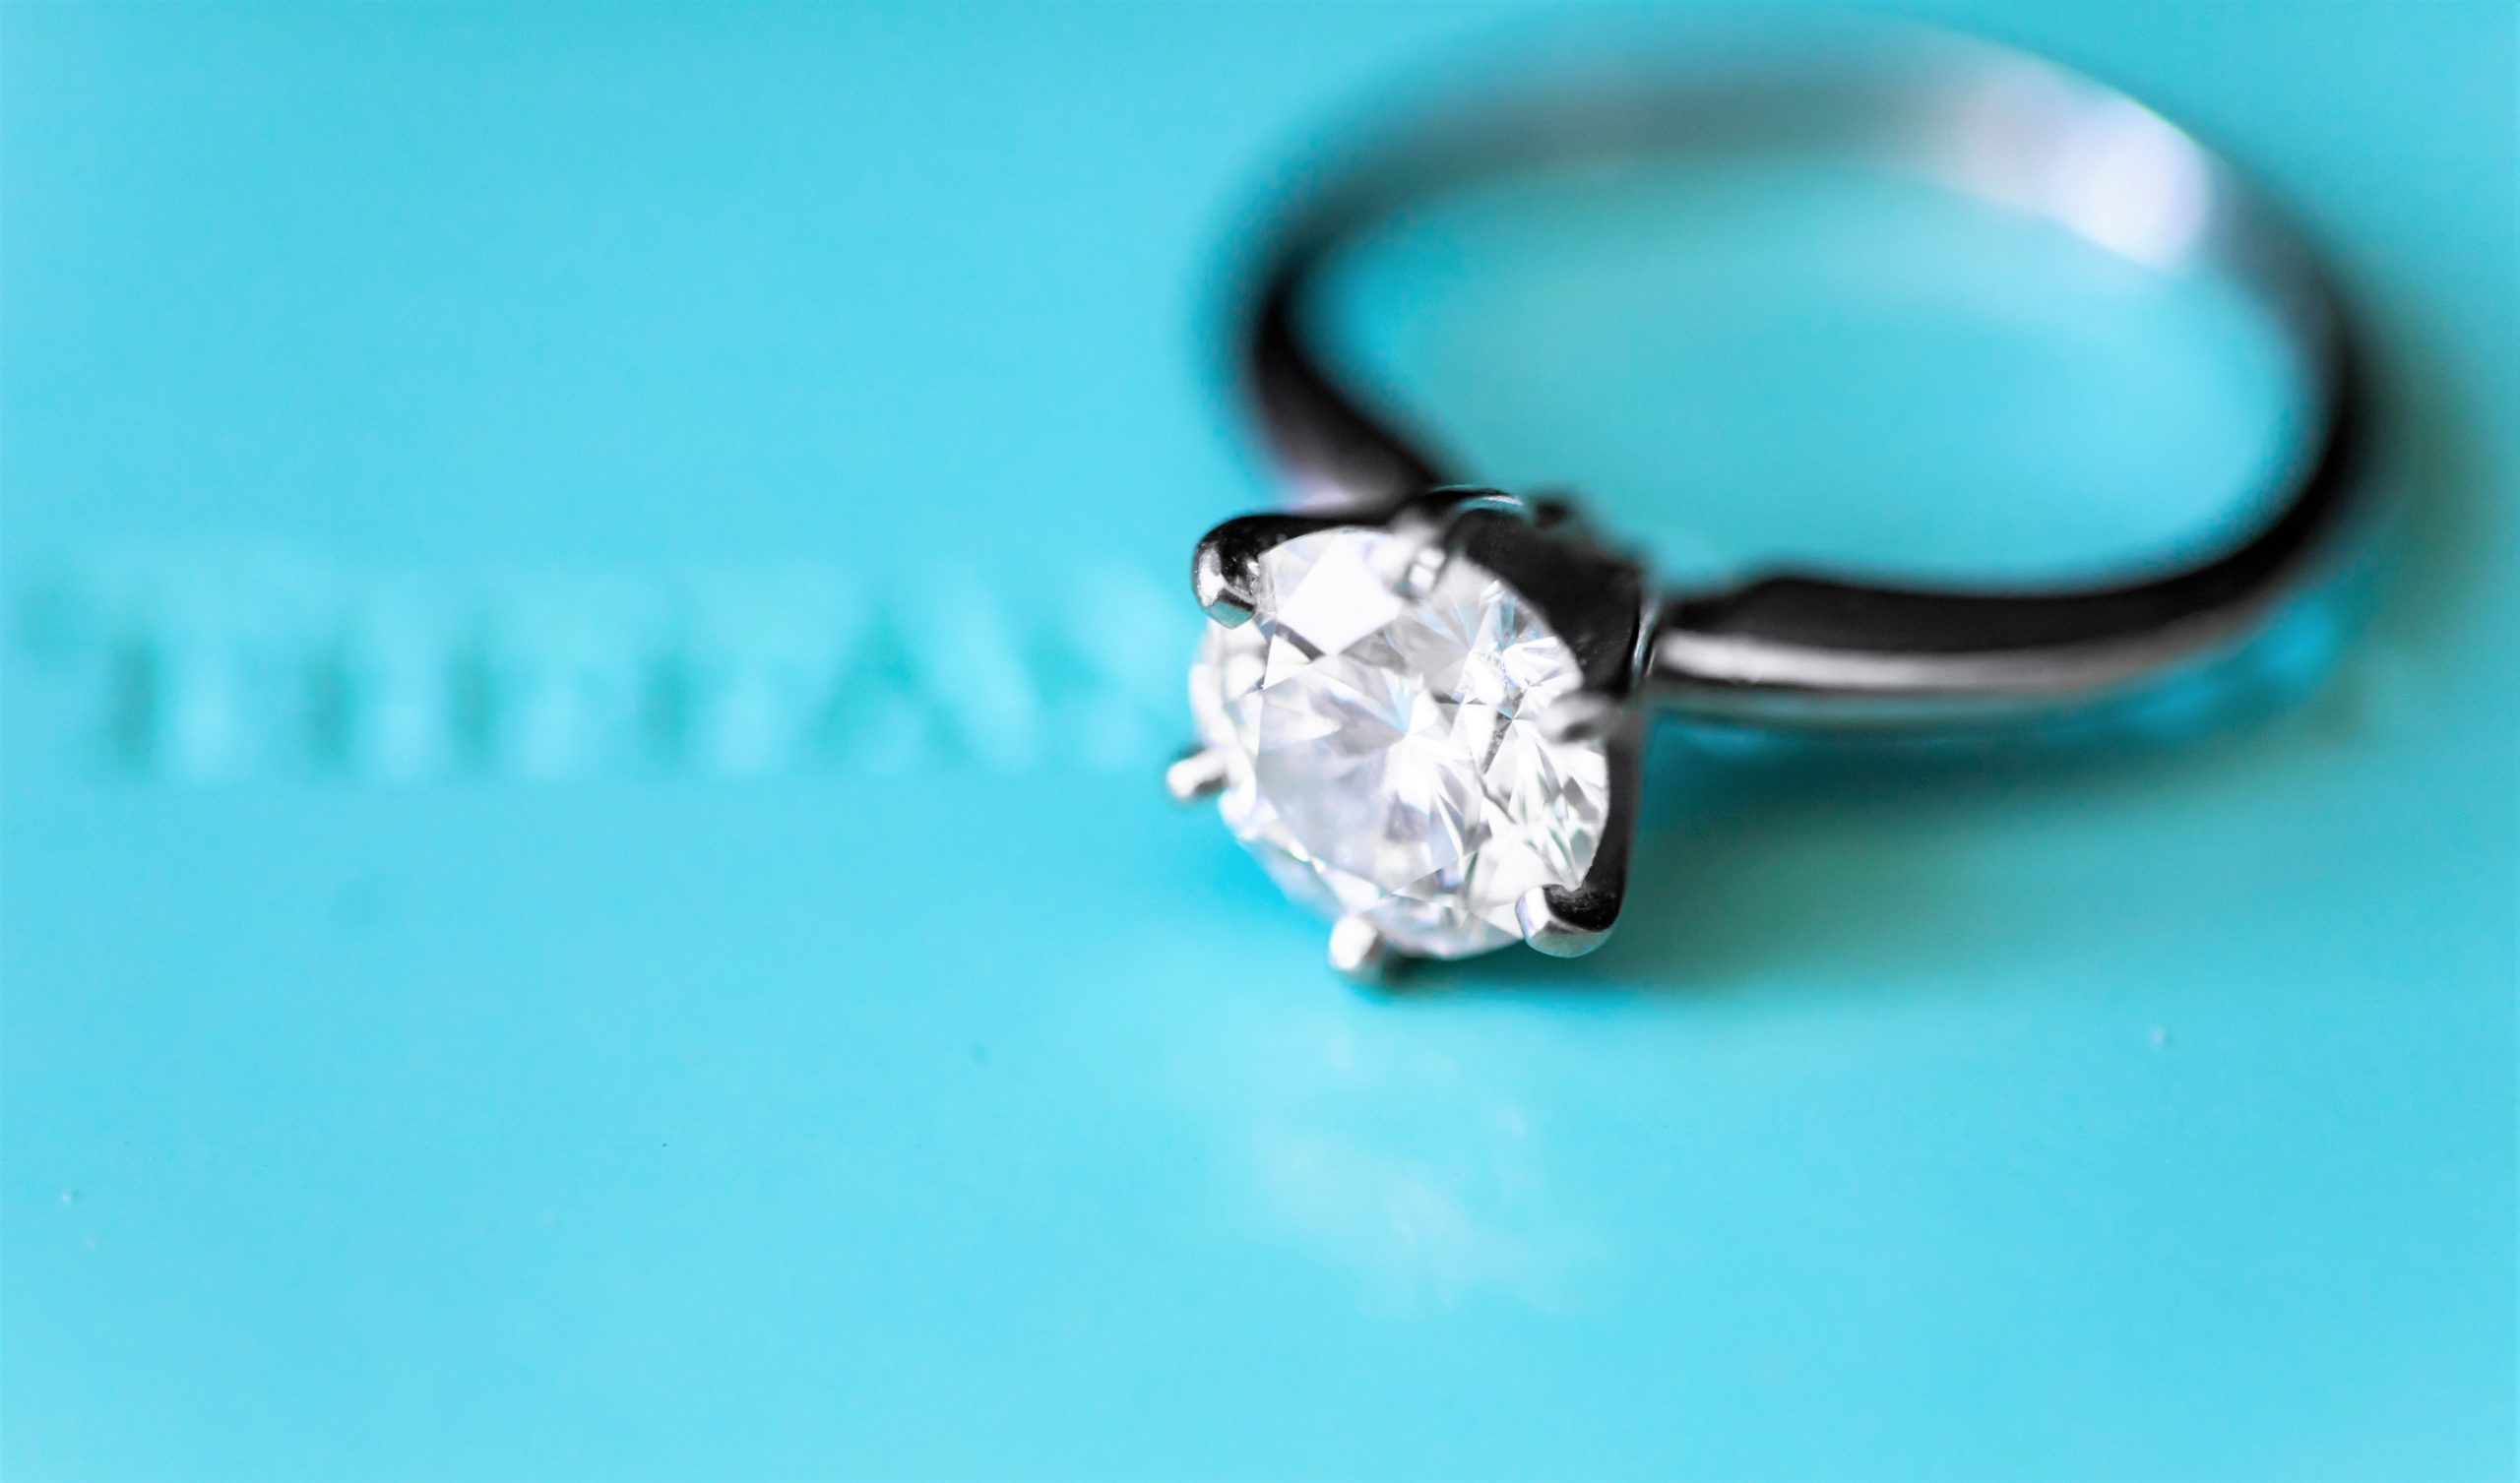 Photo of a diamond engagement ring against a robin's egg blue box that is presumably the brand, Tiffany's